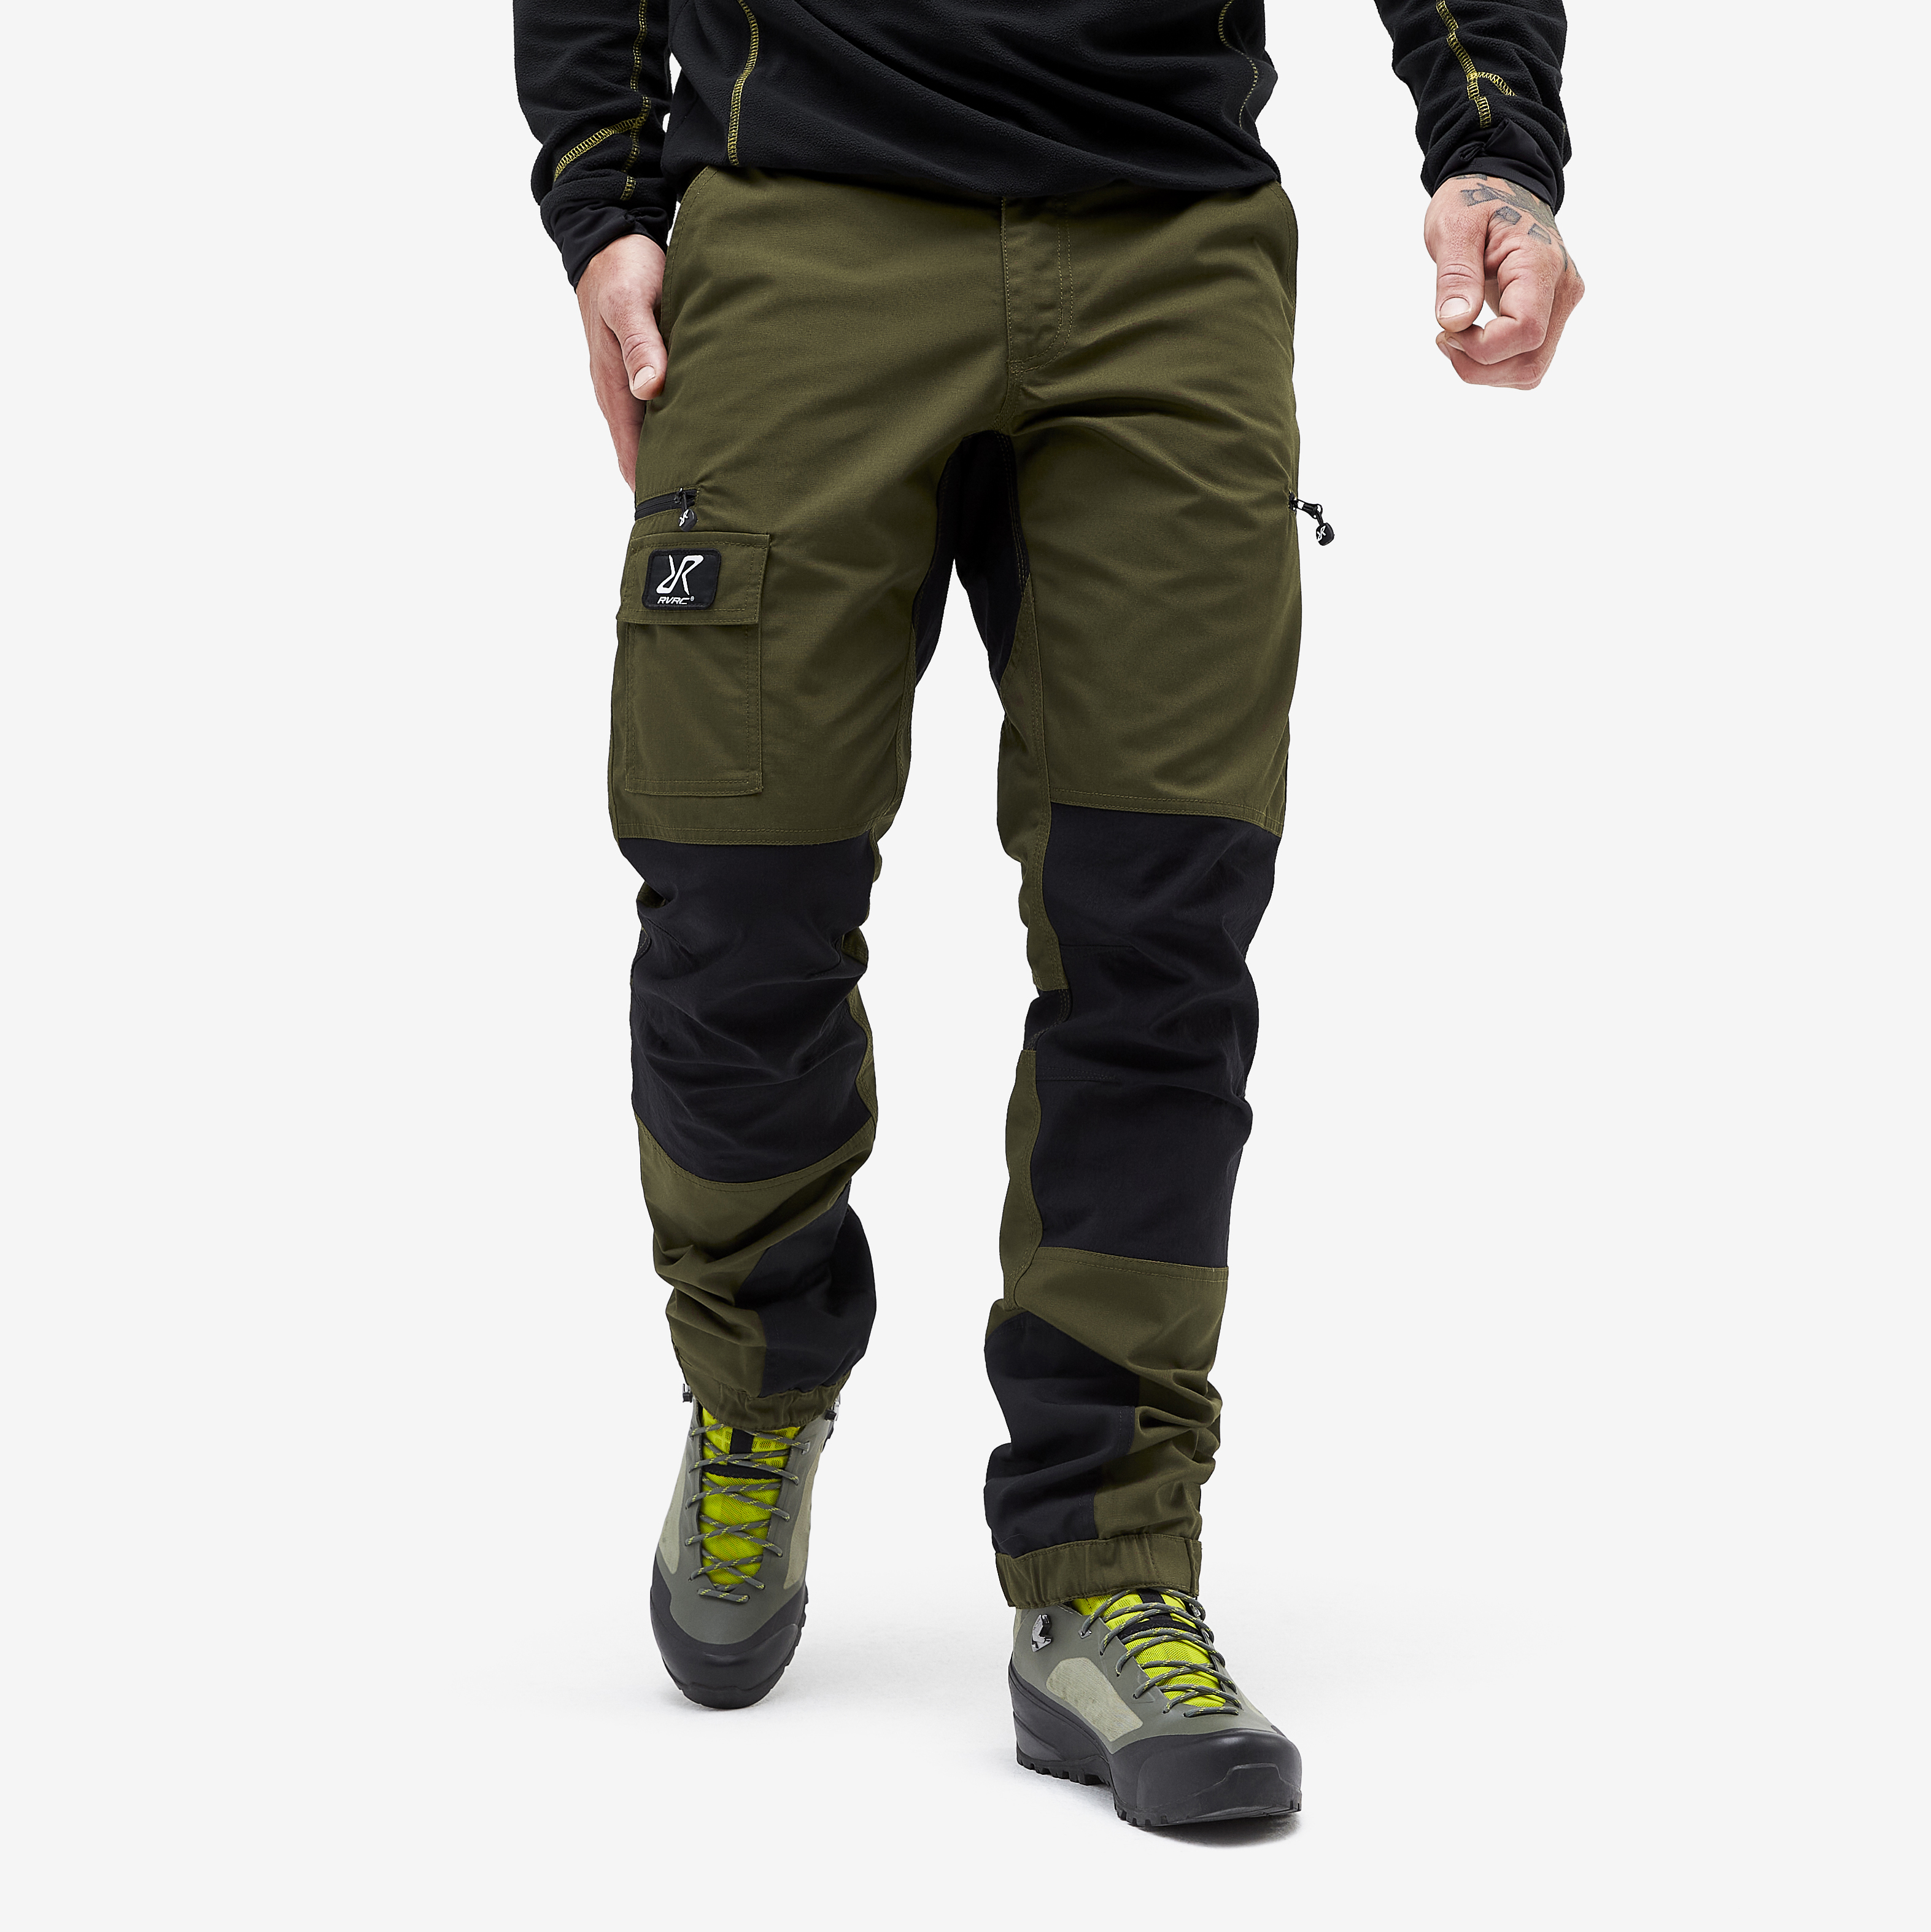 Nordwand outdoor pants for men in green